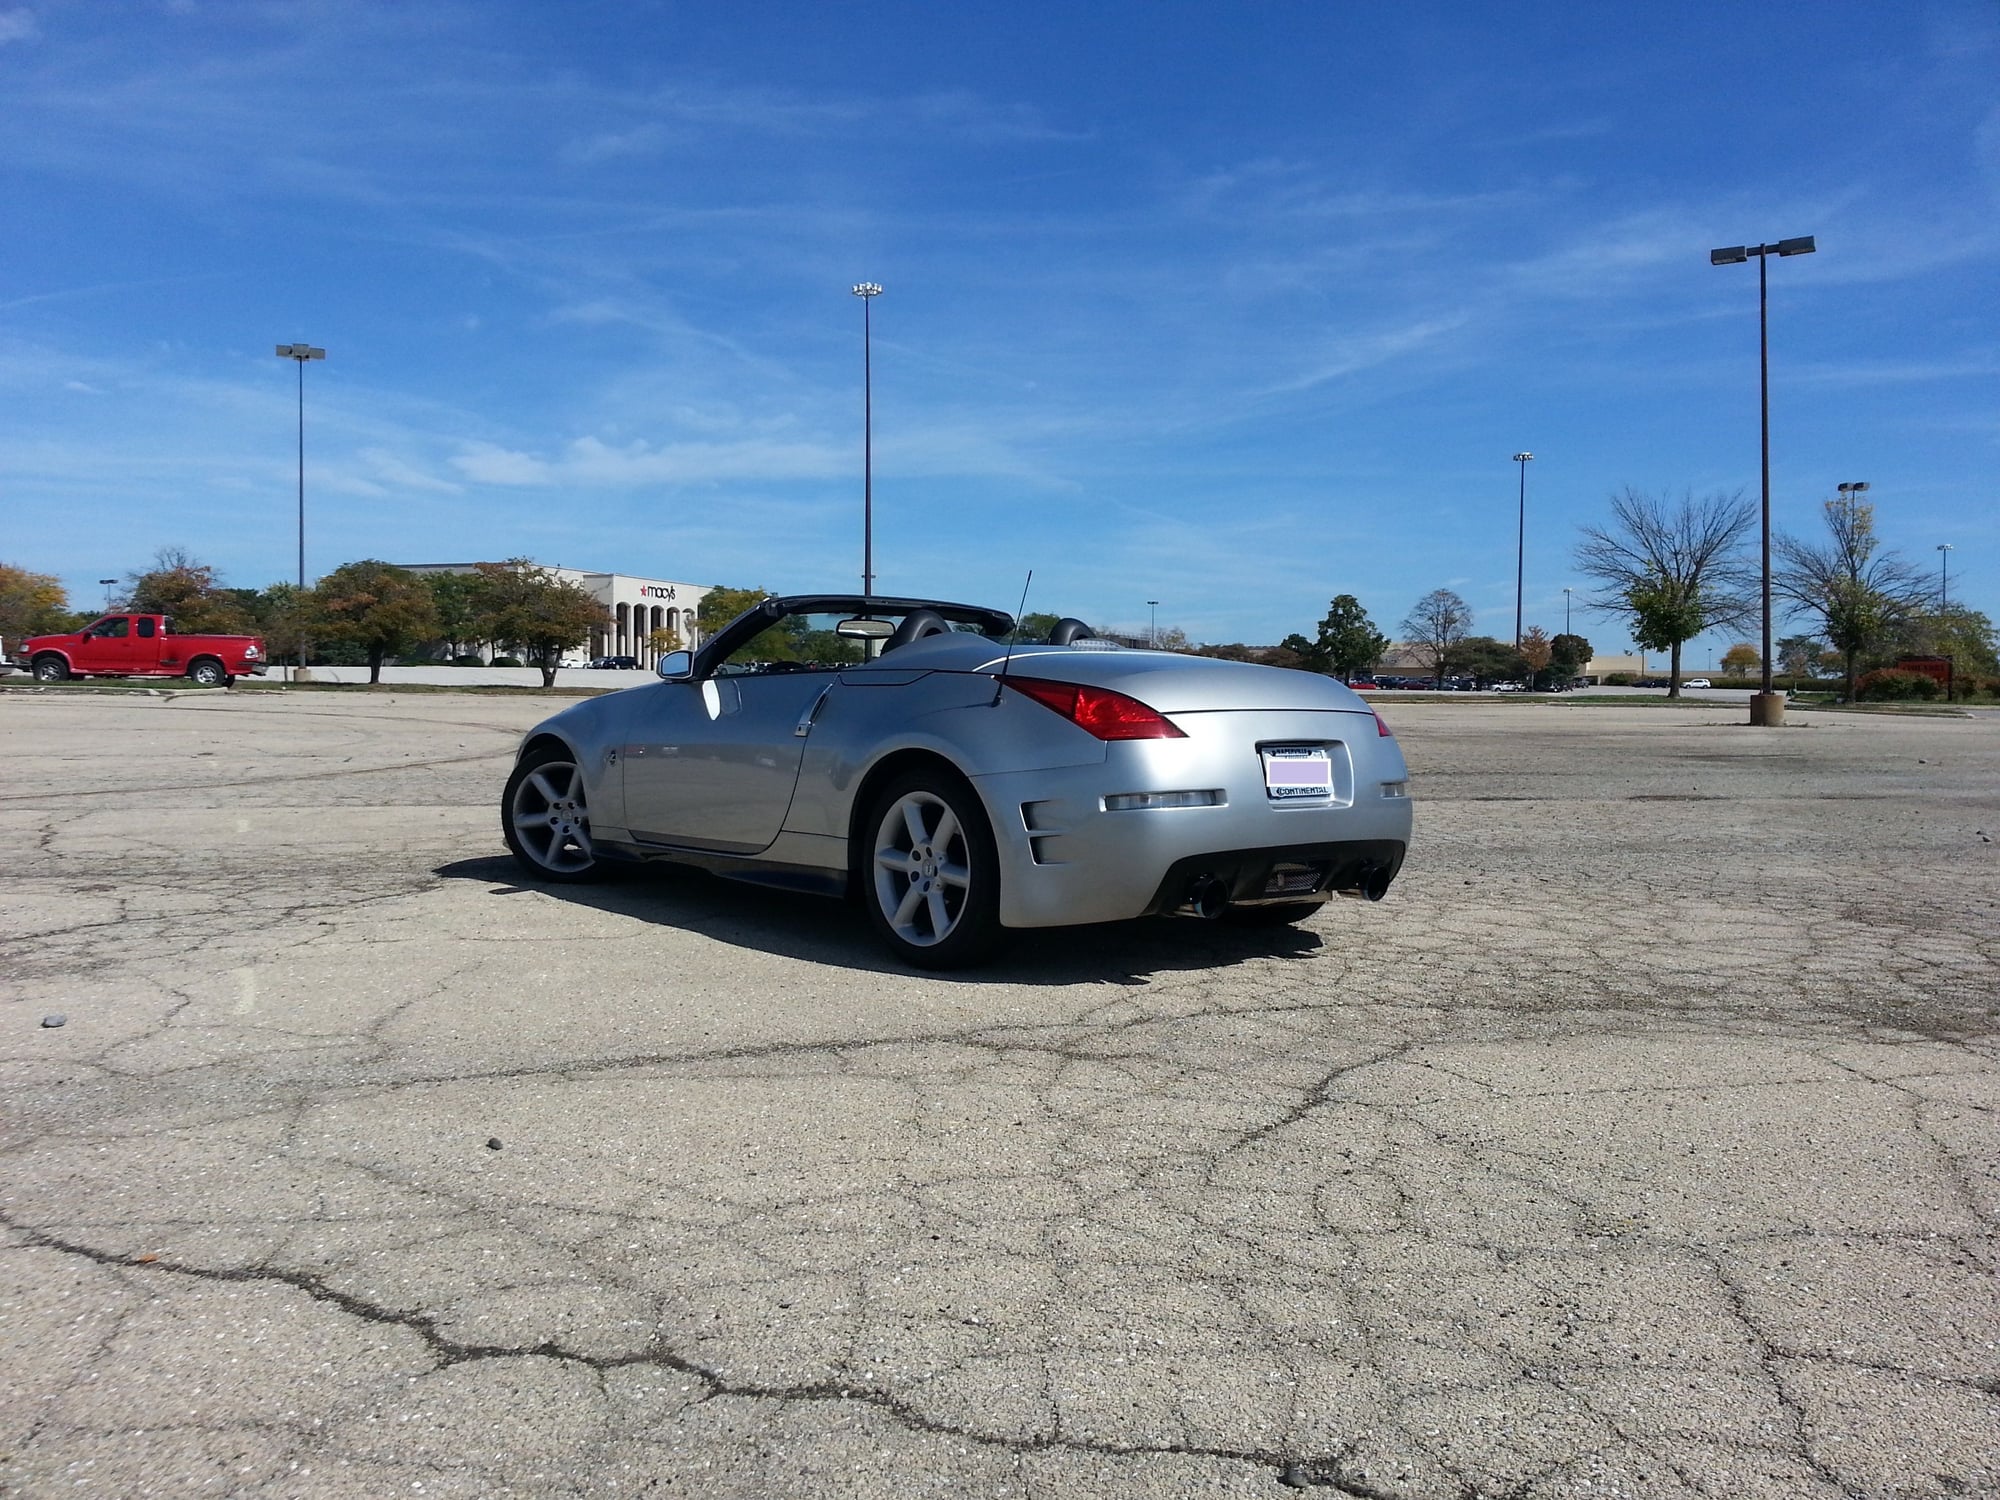 Strokered engine block cracked -  - Nissan 350Z and 370Z Forum  Discussion